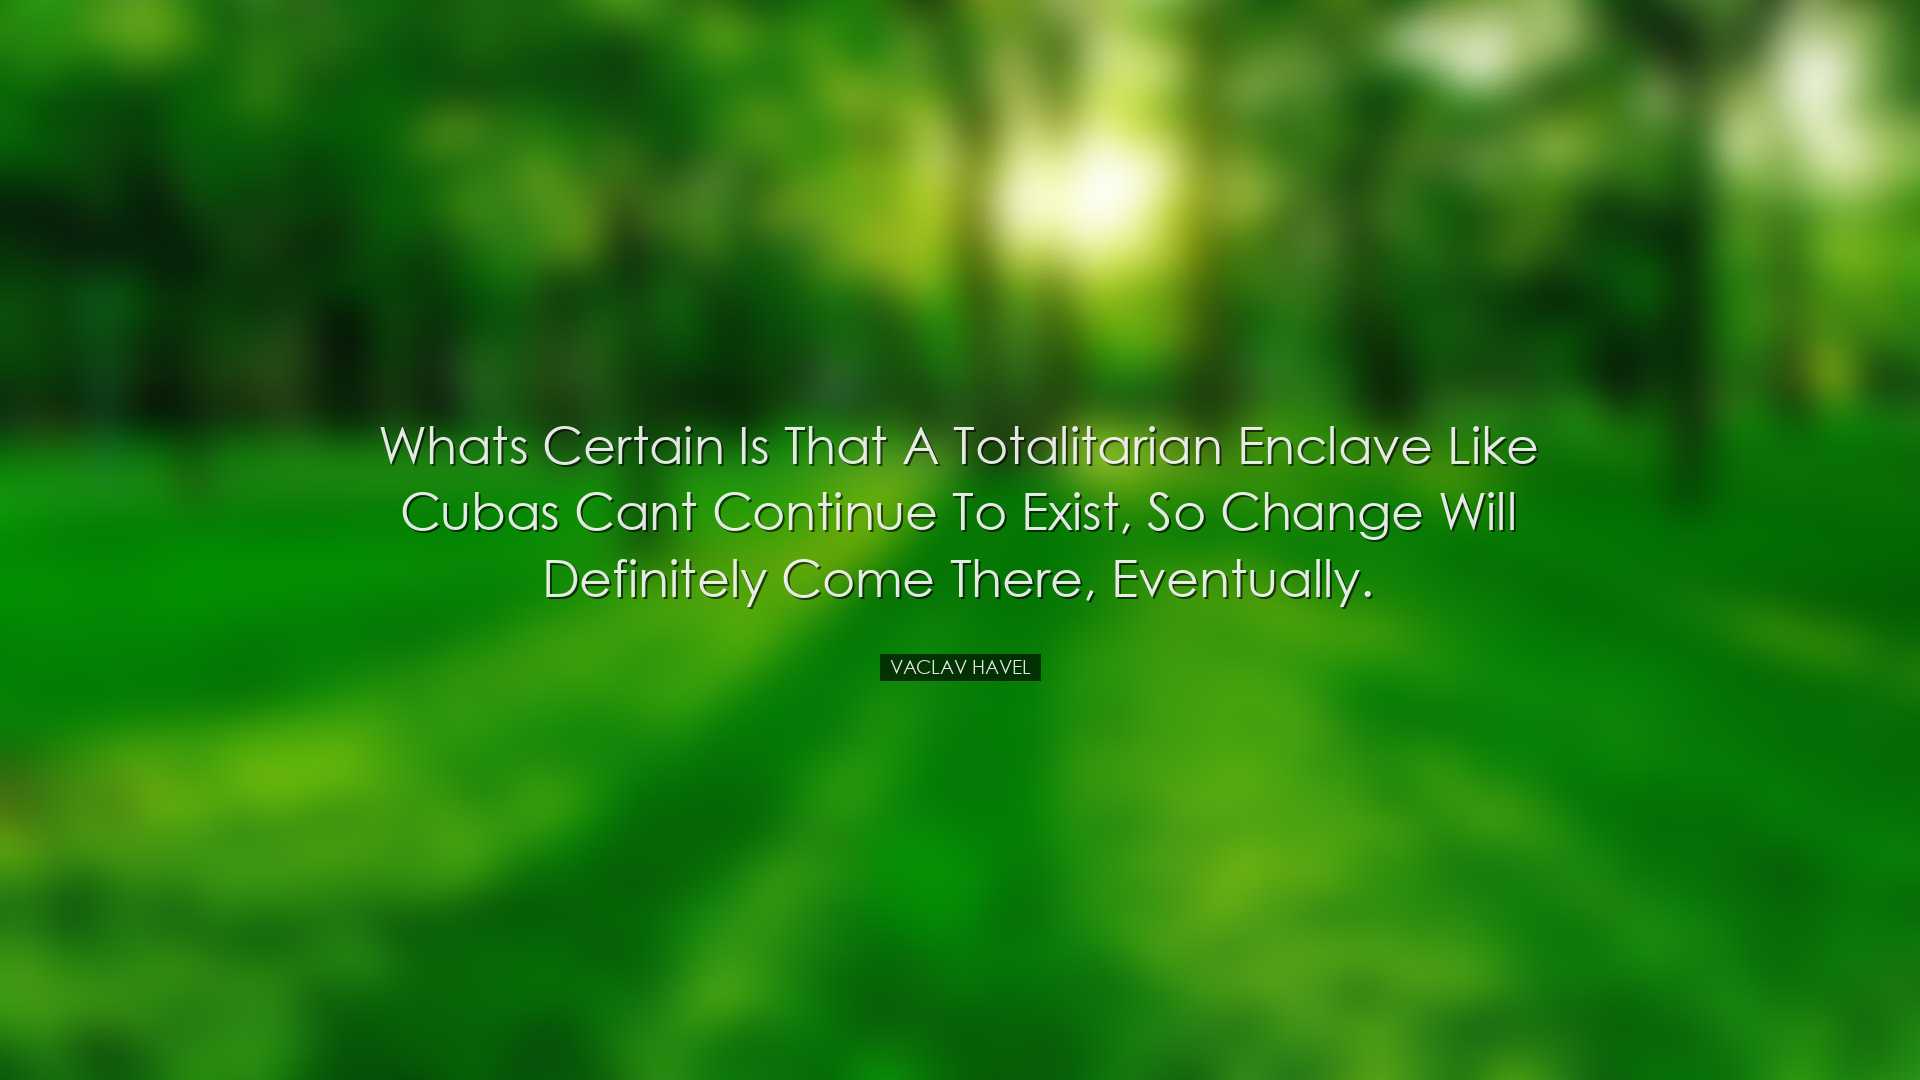 Whats certain is that a totalitarian enclave like Cubas cant conti